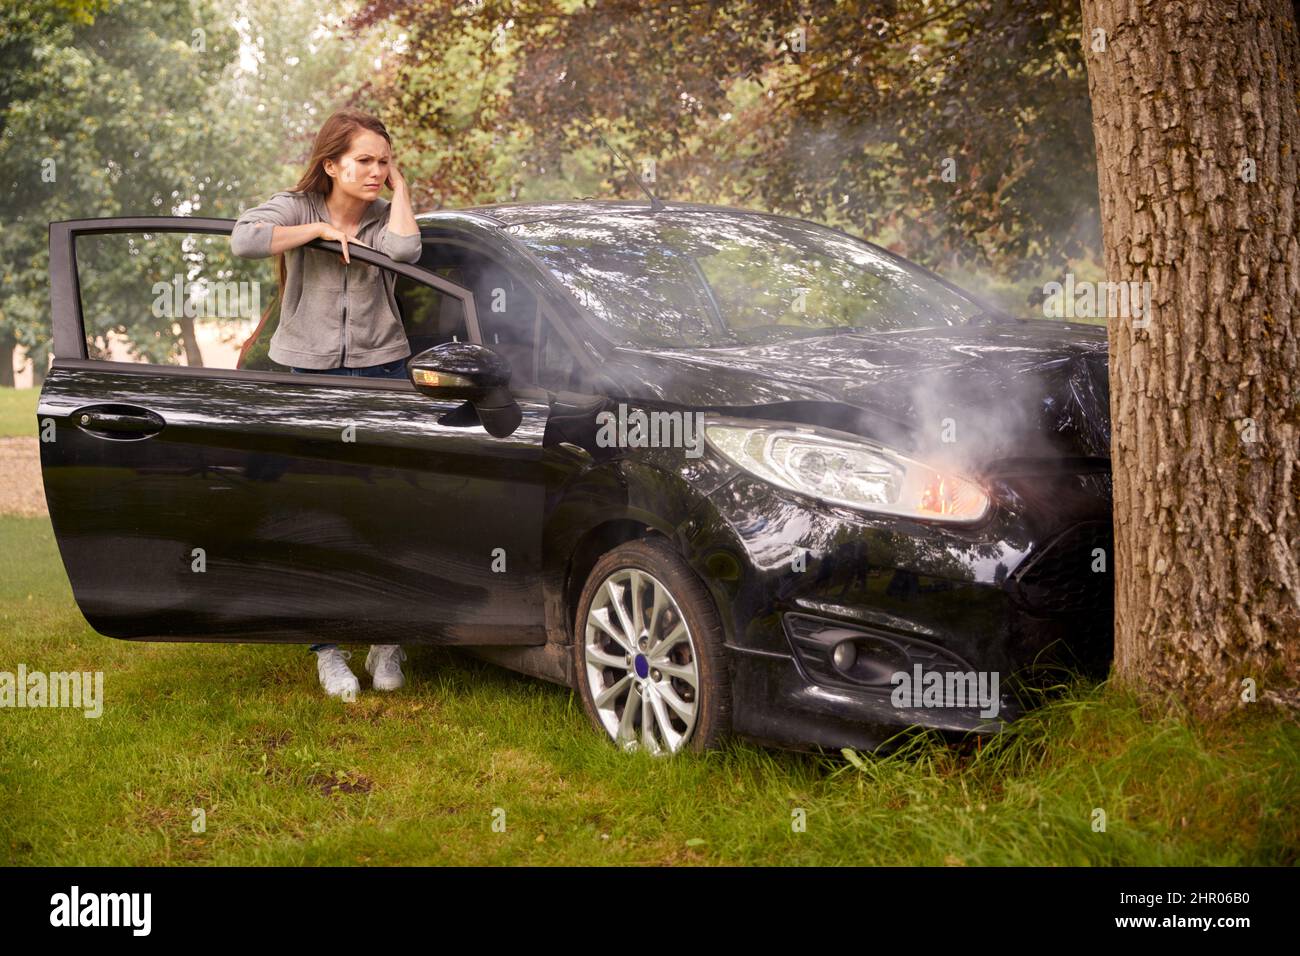 Woman Next To Car Crashed Into Tree Inspecting Accident Damage Stock Photo